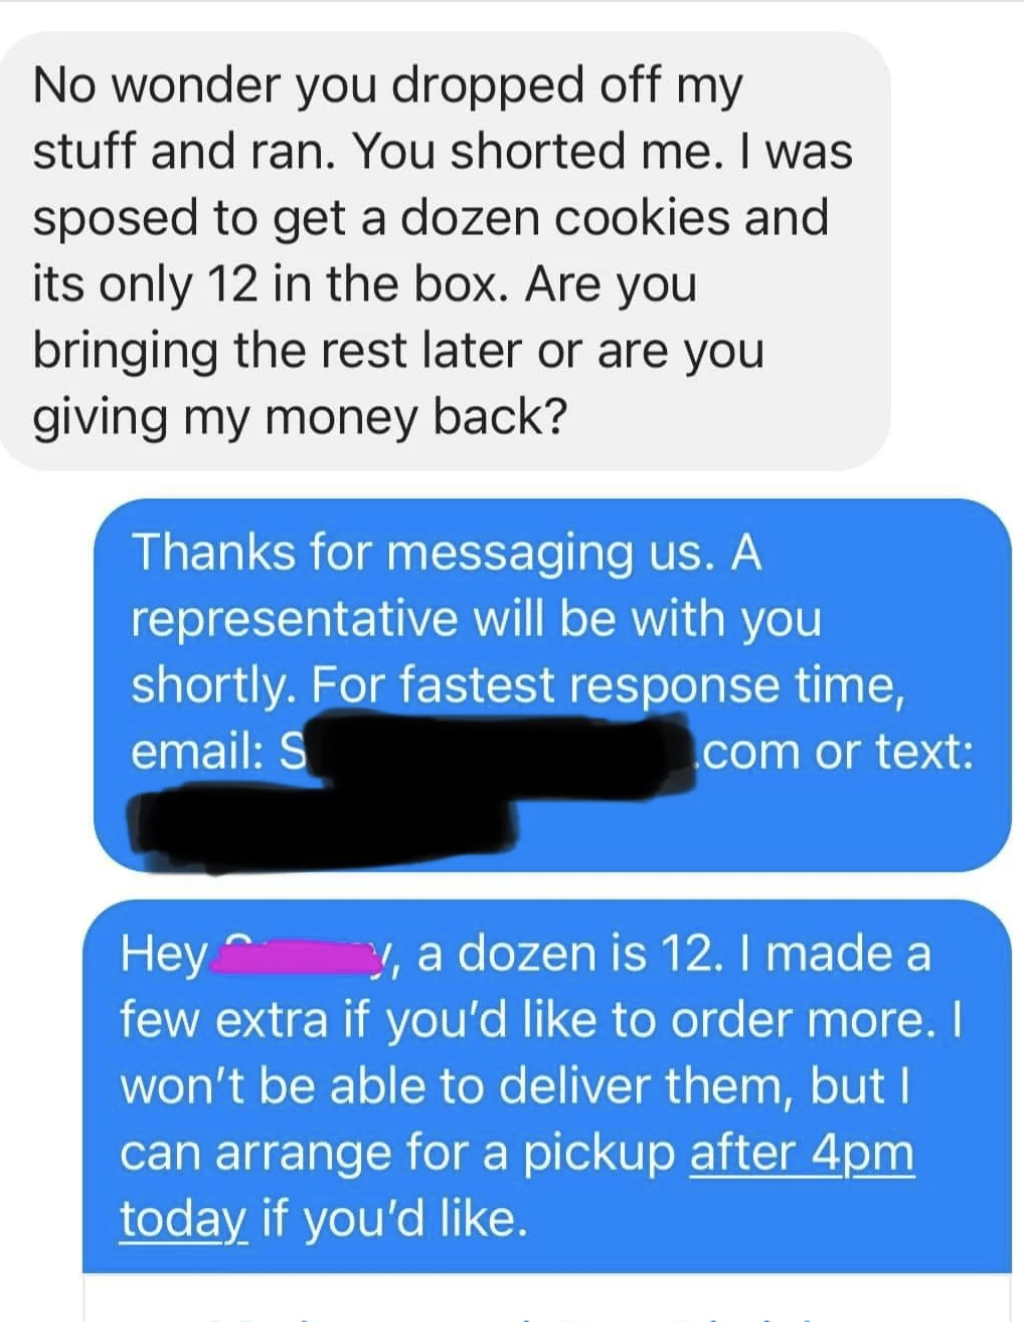 Text conversation about missing cookies in an order, ending with a resolution offering a pickup for additional cookies